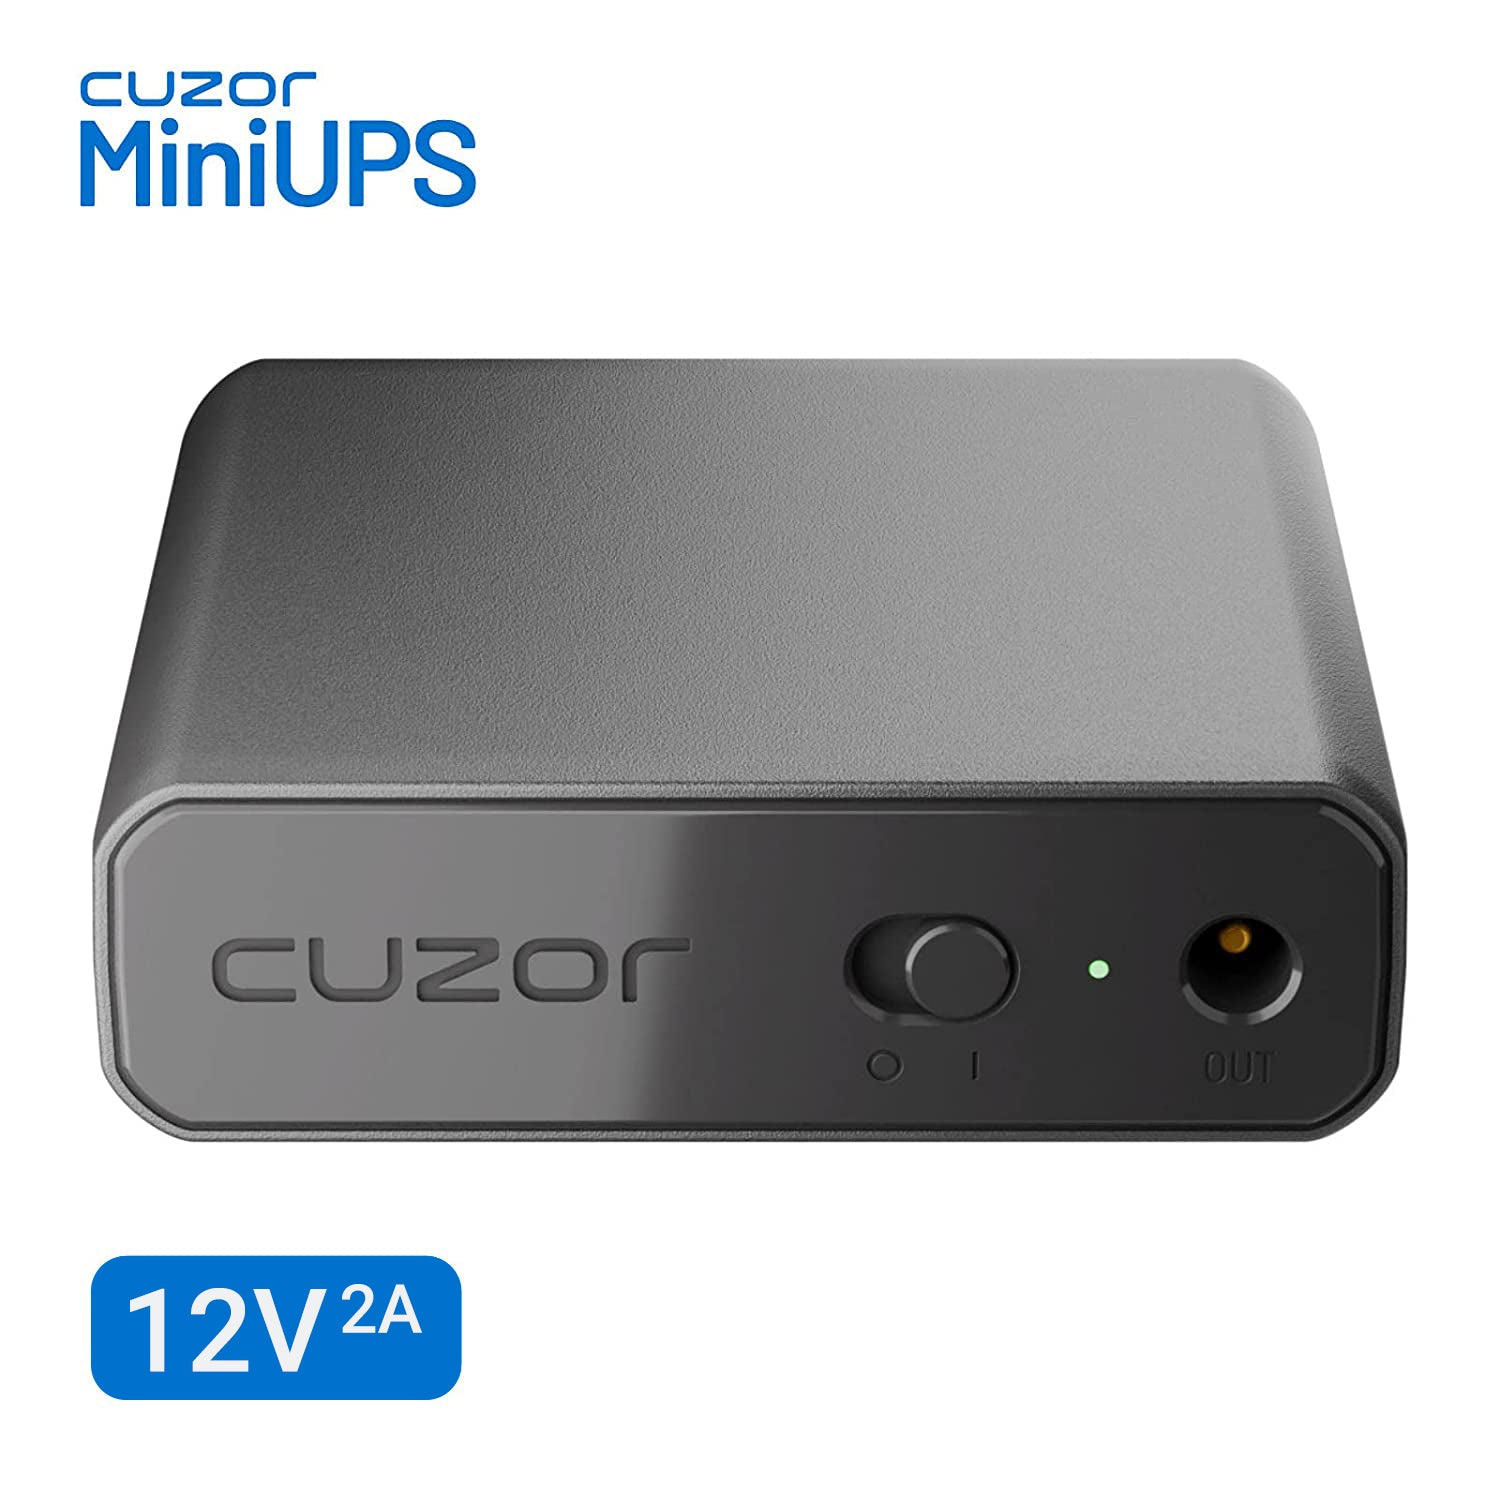 Cuzor Mini UPS 12V 2A | Upto 4 Hours Backup | 12 Months Warranty | Supports 12V Routers Upto 2 Amps